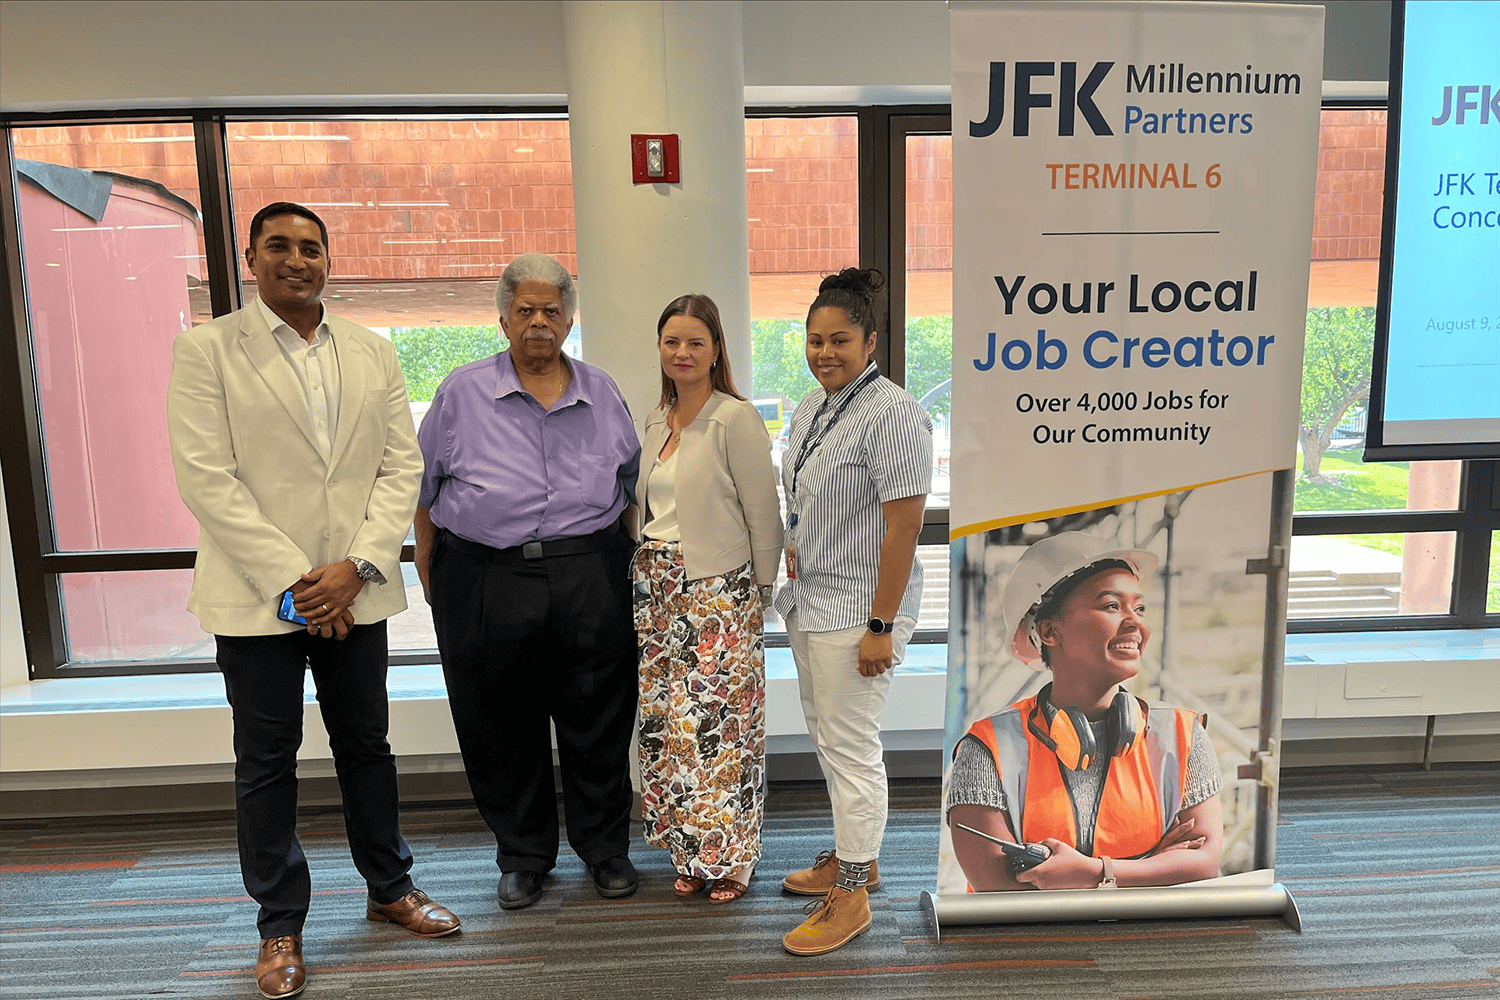 Senator Leroy Comrie hosted the JFK Terminal 6 Concession Outreach Event on August 9, 2023 at York College